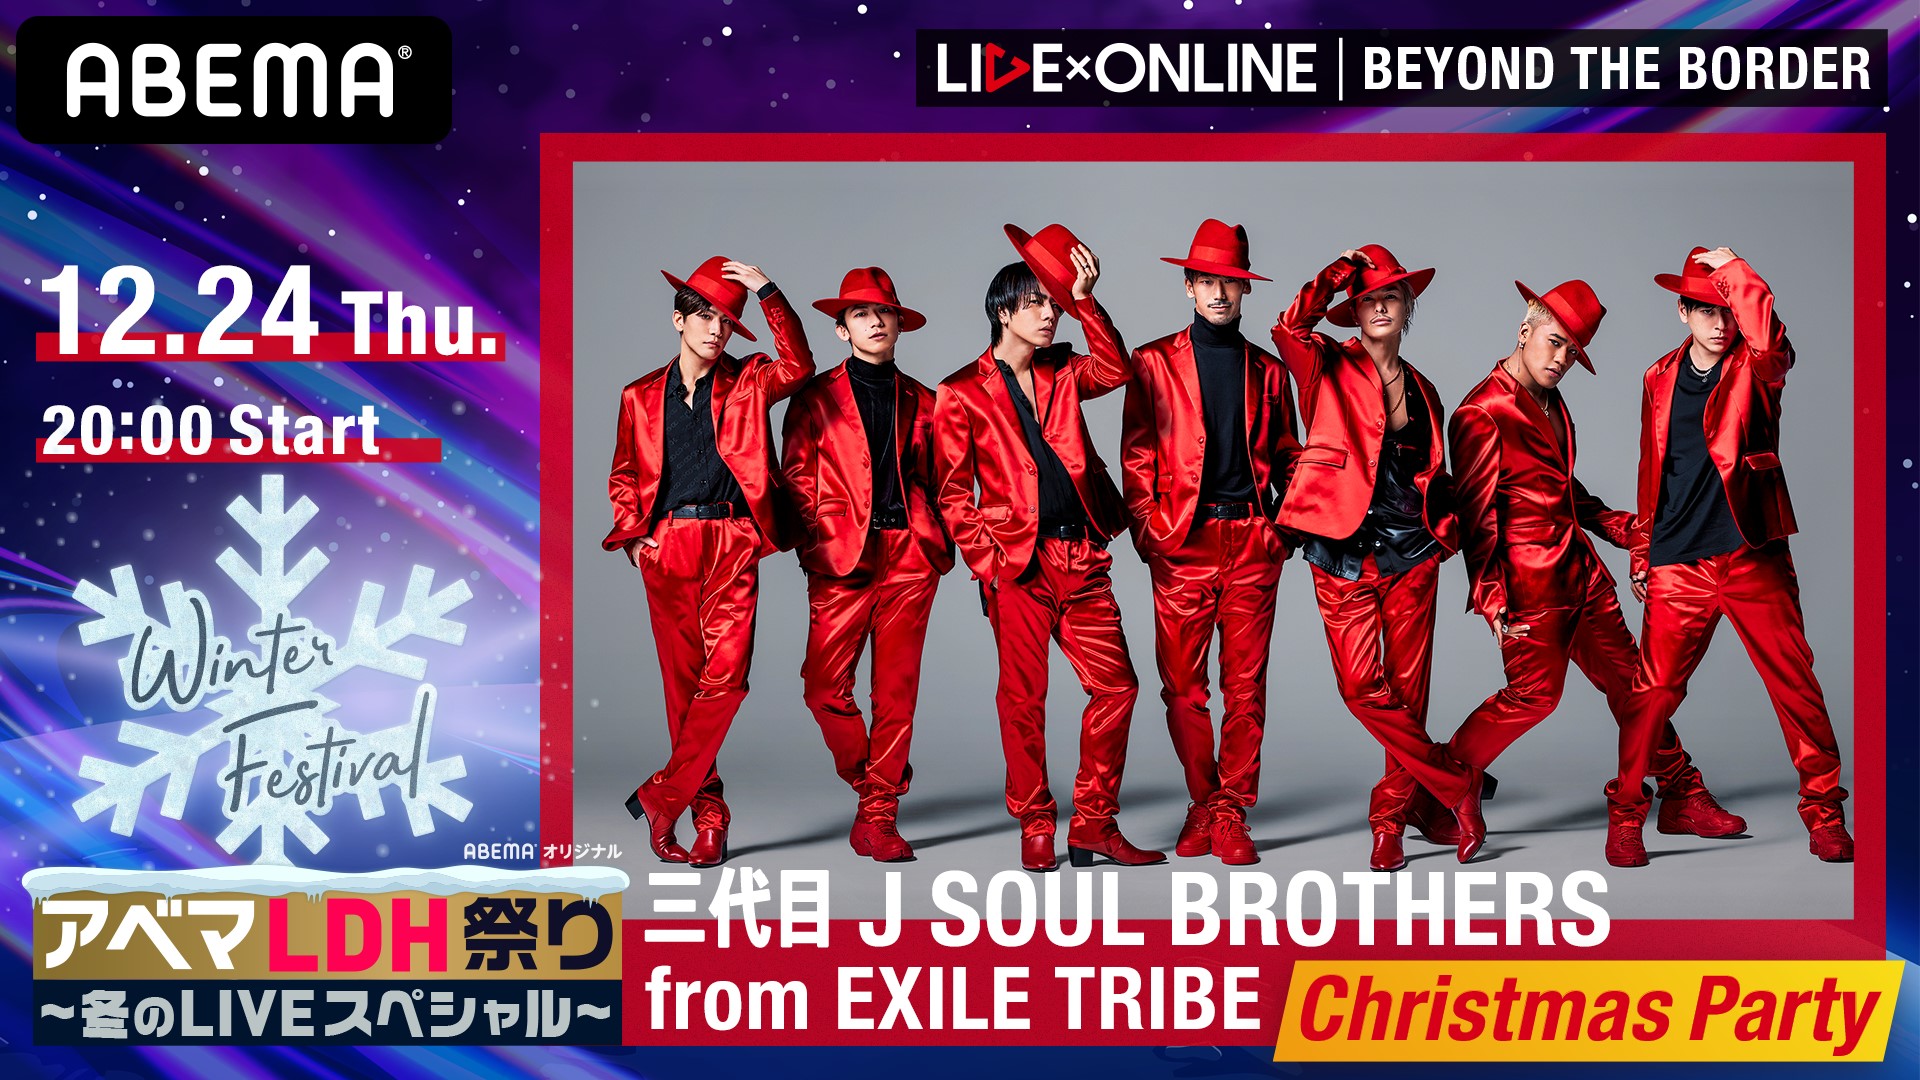 「LIVE×ONLINE BEYOND THE BORDER 三代目J SOUL BROTHERS~Xmas Party~」